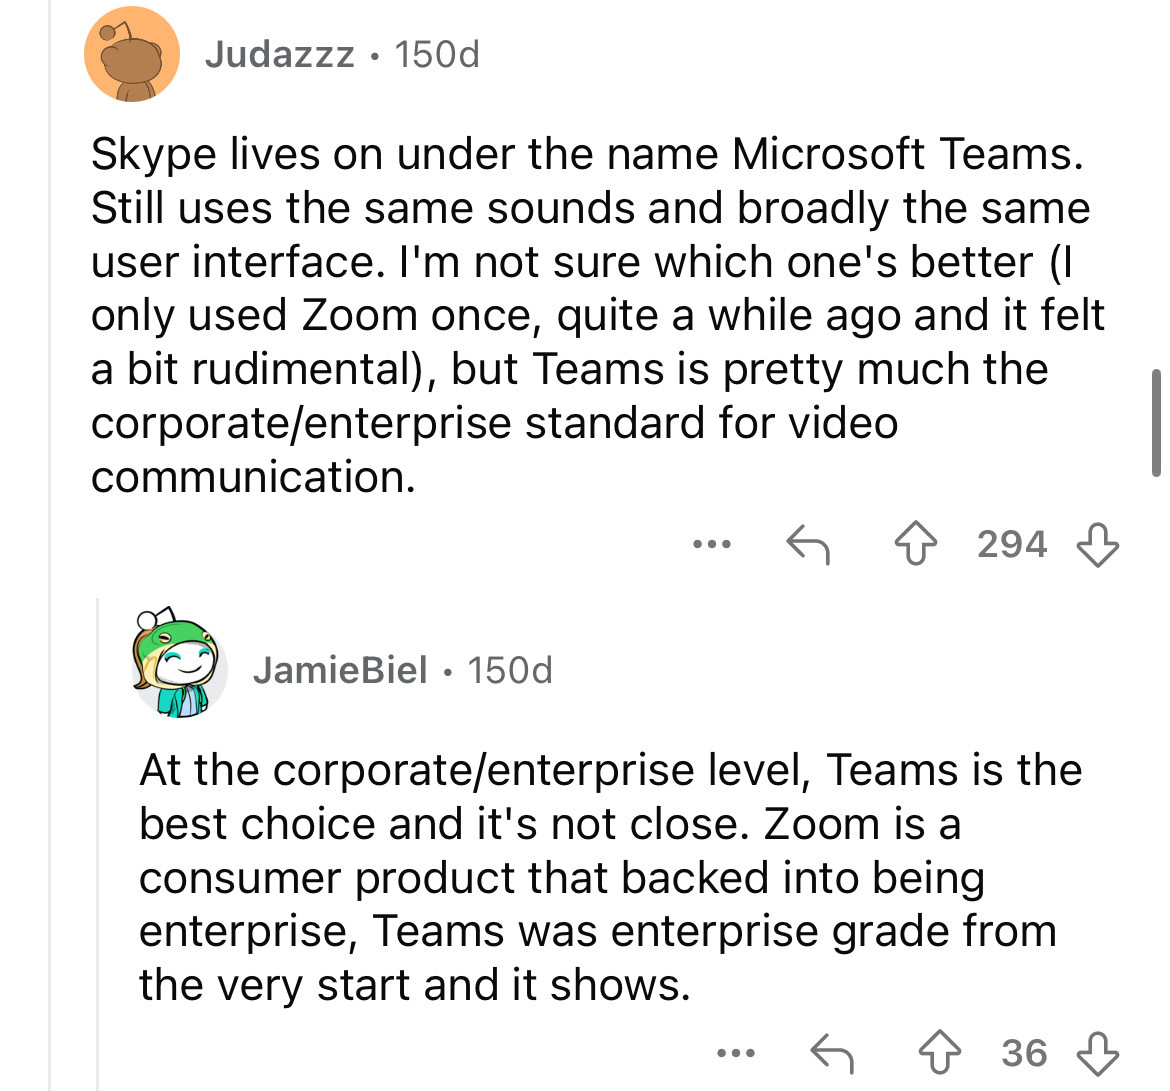 screenshot - Judazzz 150d Skype lives on under the name Microsoft Teams. Still uses the same sounds and broadly the same user interface. I'm not sure which one's better 1 only used Zoom once, quite a while ago and it felt a bit rudimental, but Teams is pr